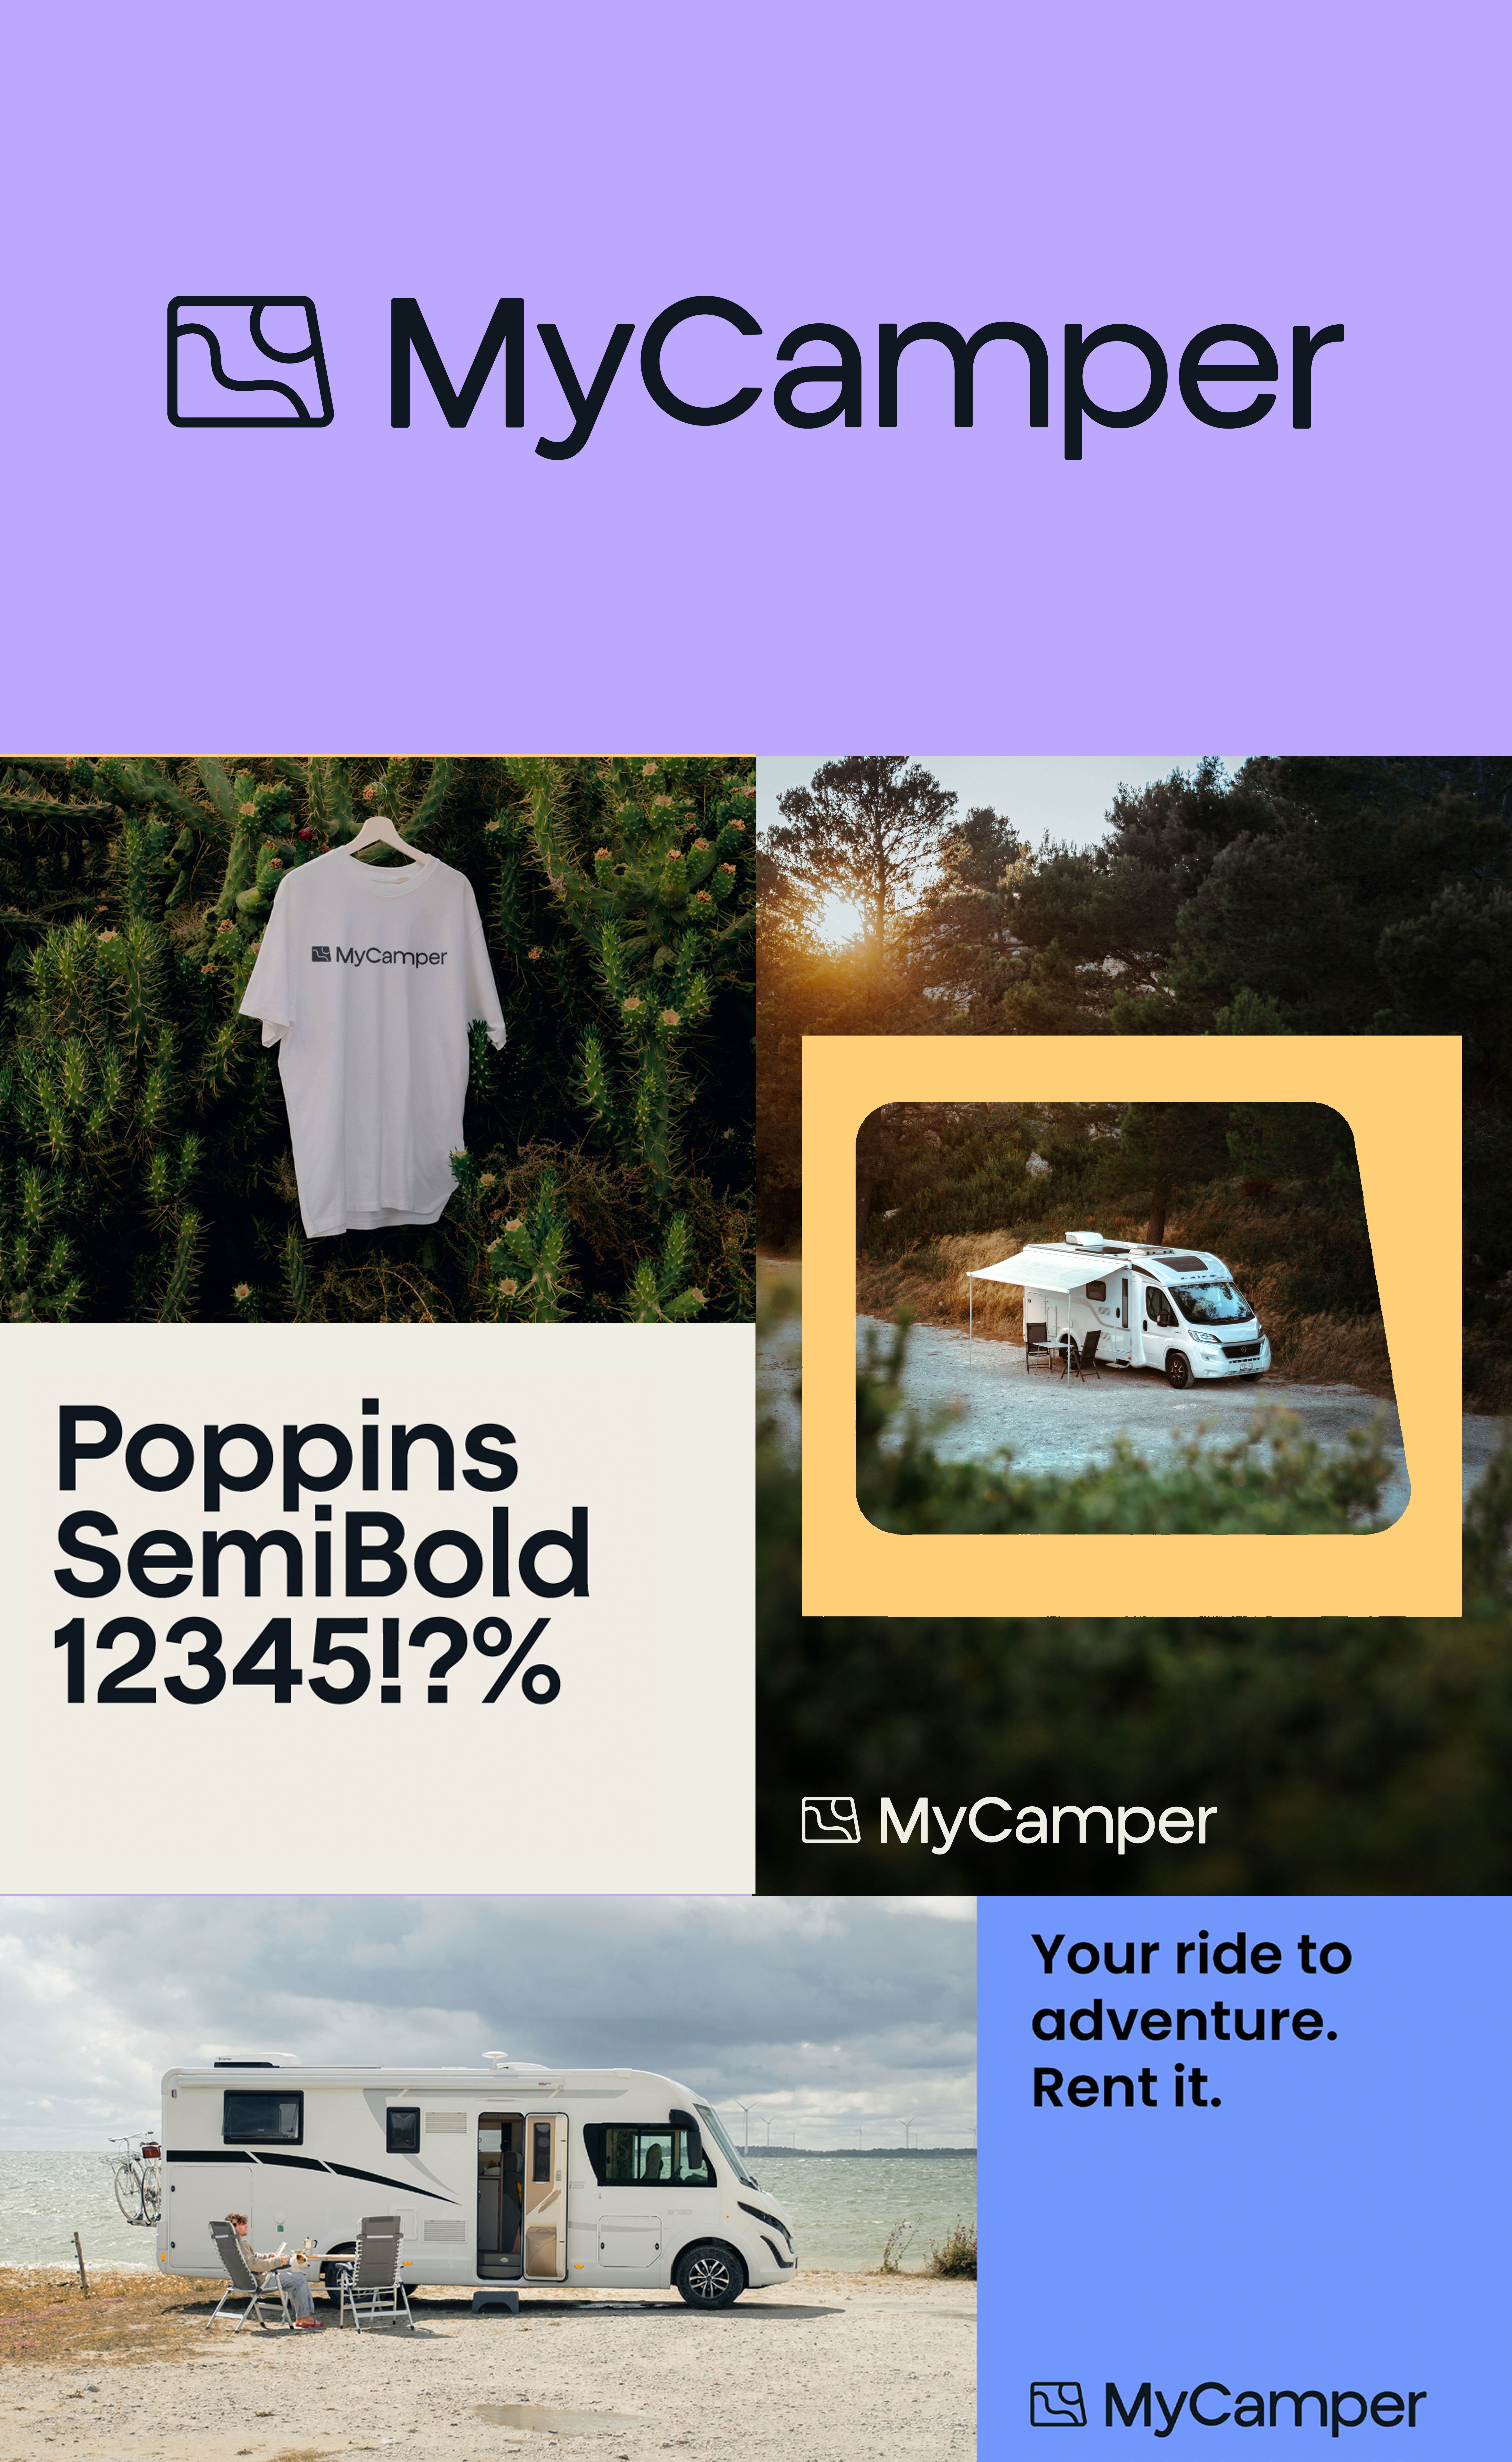 The new brand identity of MyCamper is folksy, warm and reliable.